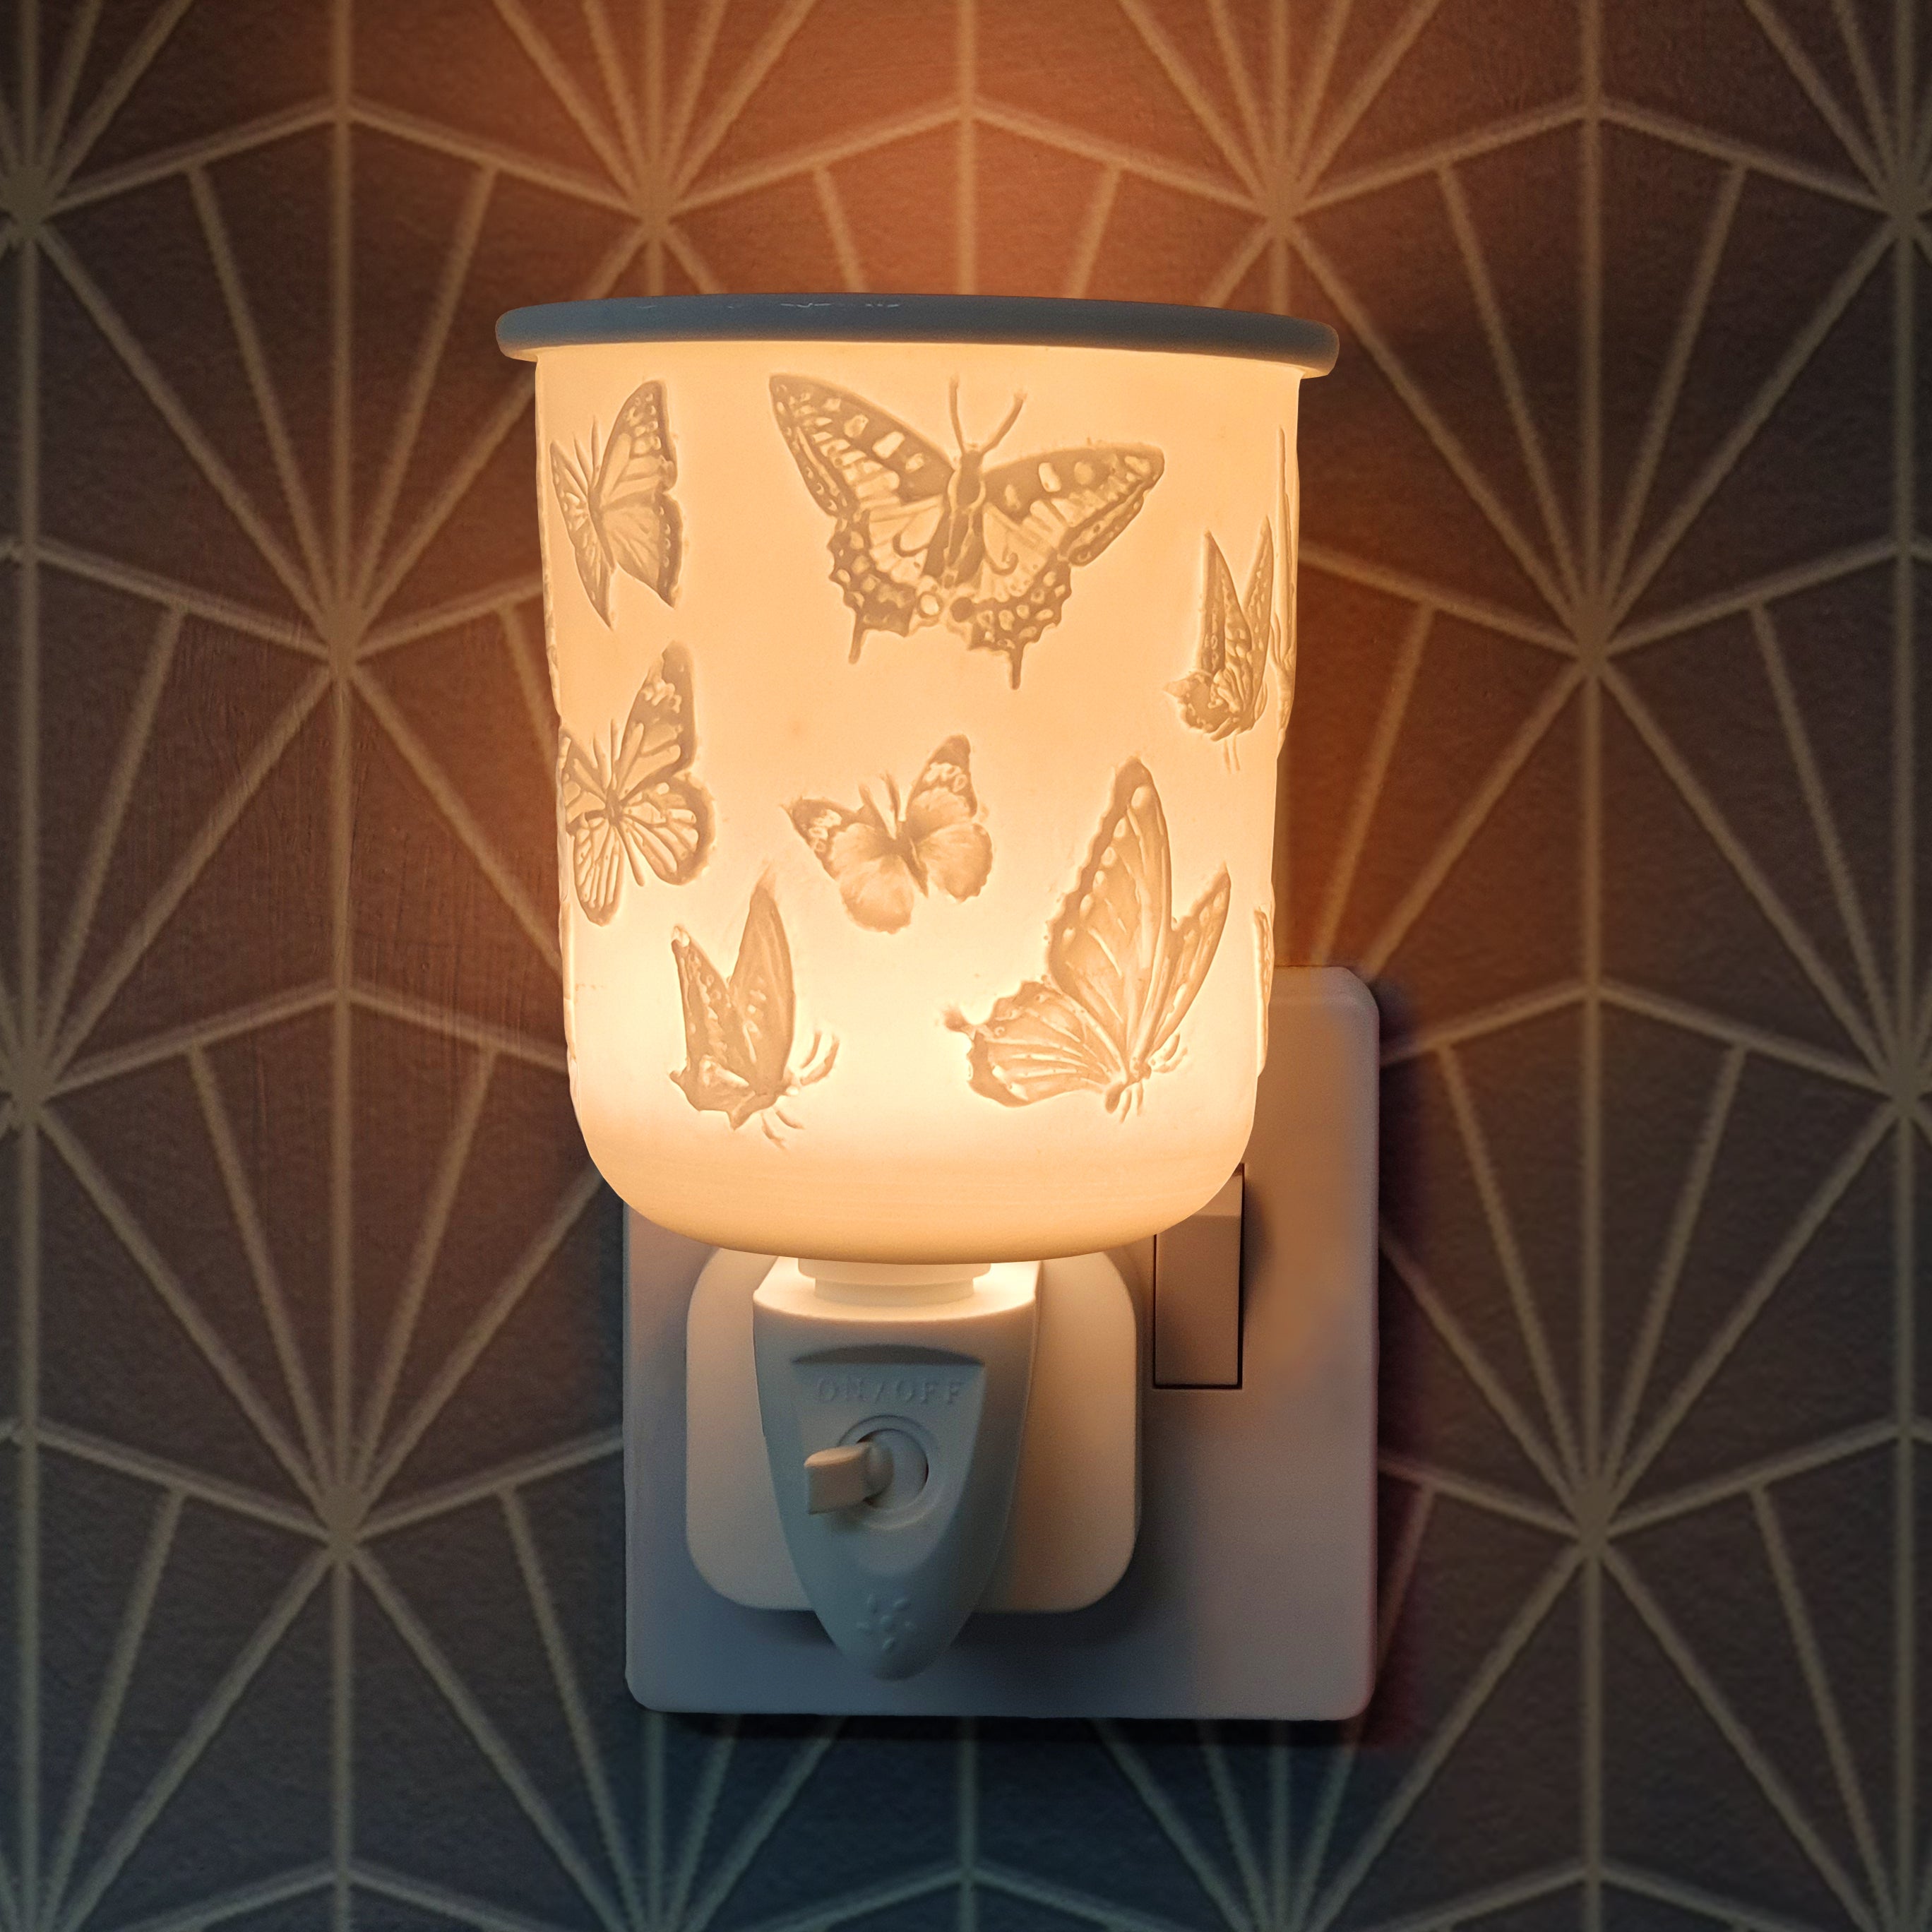 Cello - Porcelain Plug In Electric Warmer - Butterfly